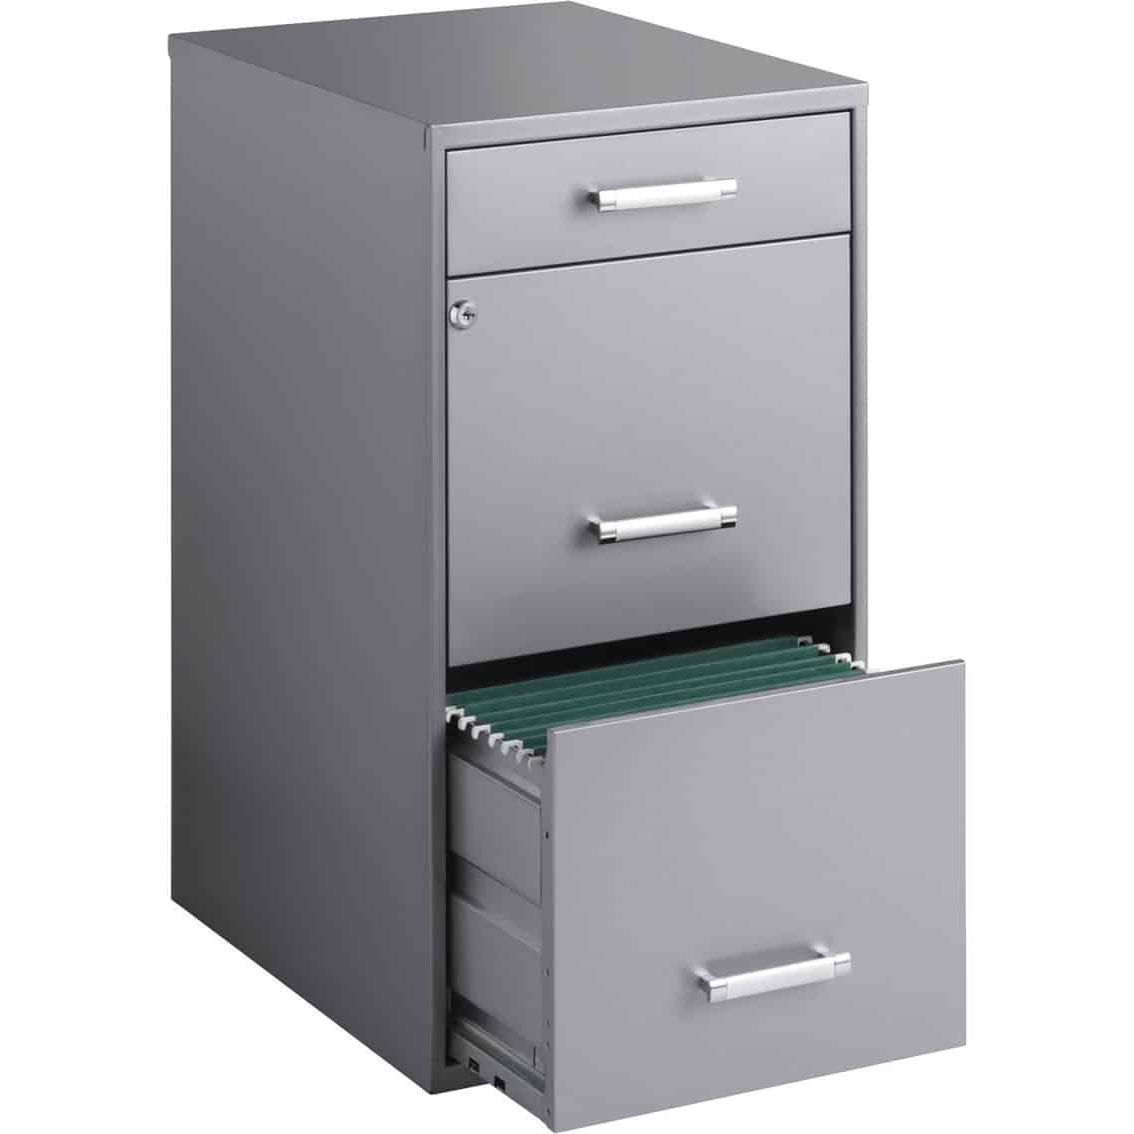 3 Drawer And 2 Door Cabinet With Metal Legs Pertaining To Best And Newest 3 Drawer File Cabinet Ikea In Contemporary File Cabinets (View 1 of 20)